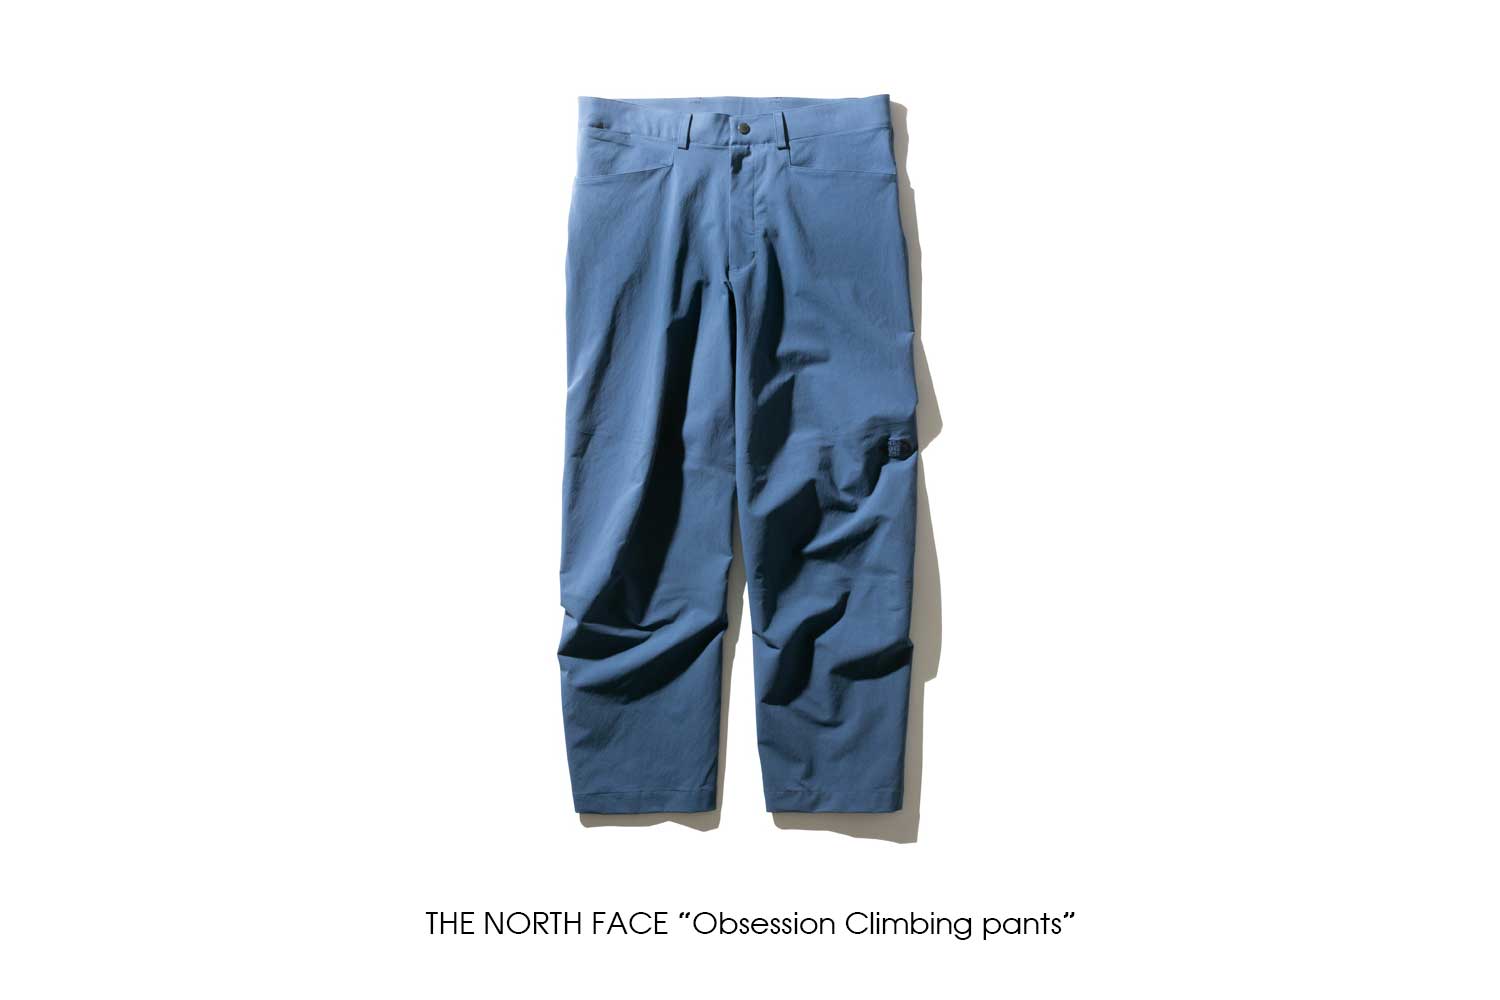 THE NORTH FACE "Obsession Climbing pants"